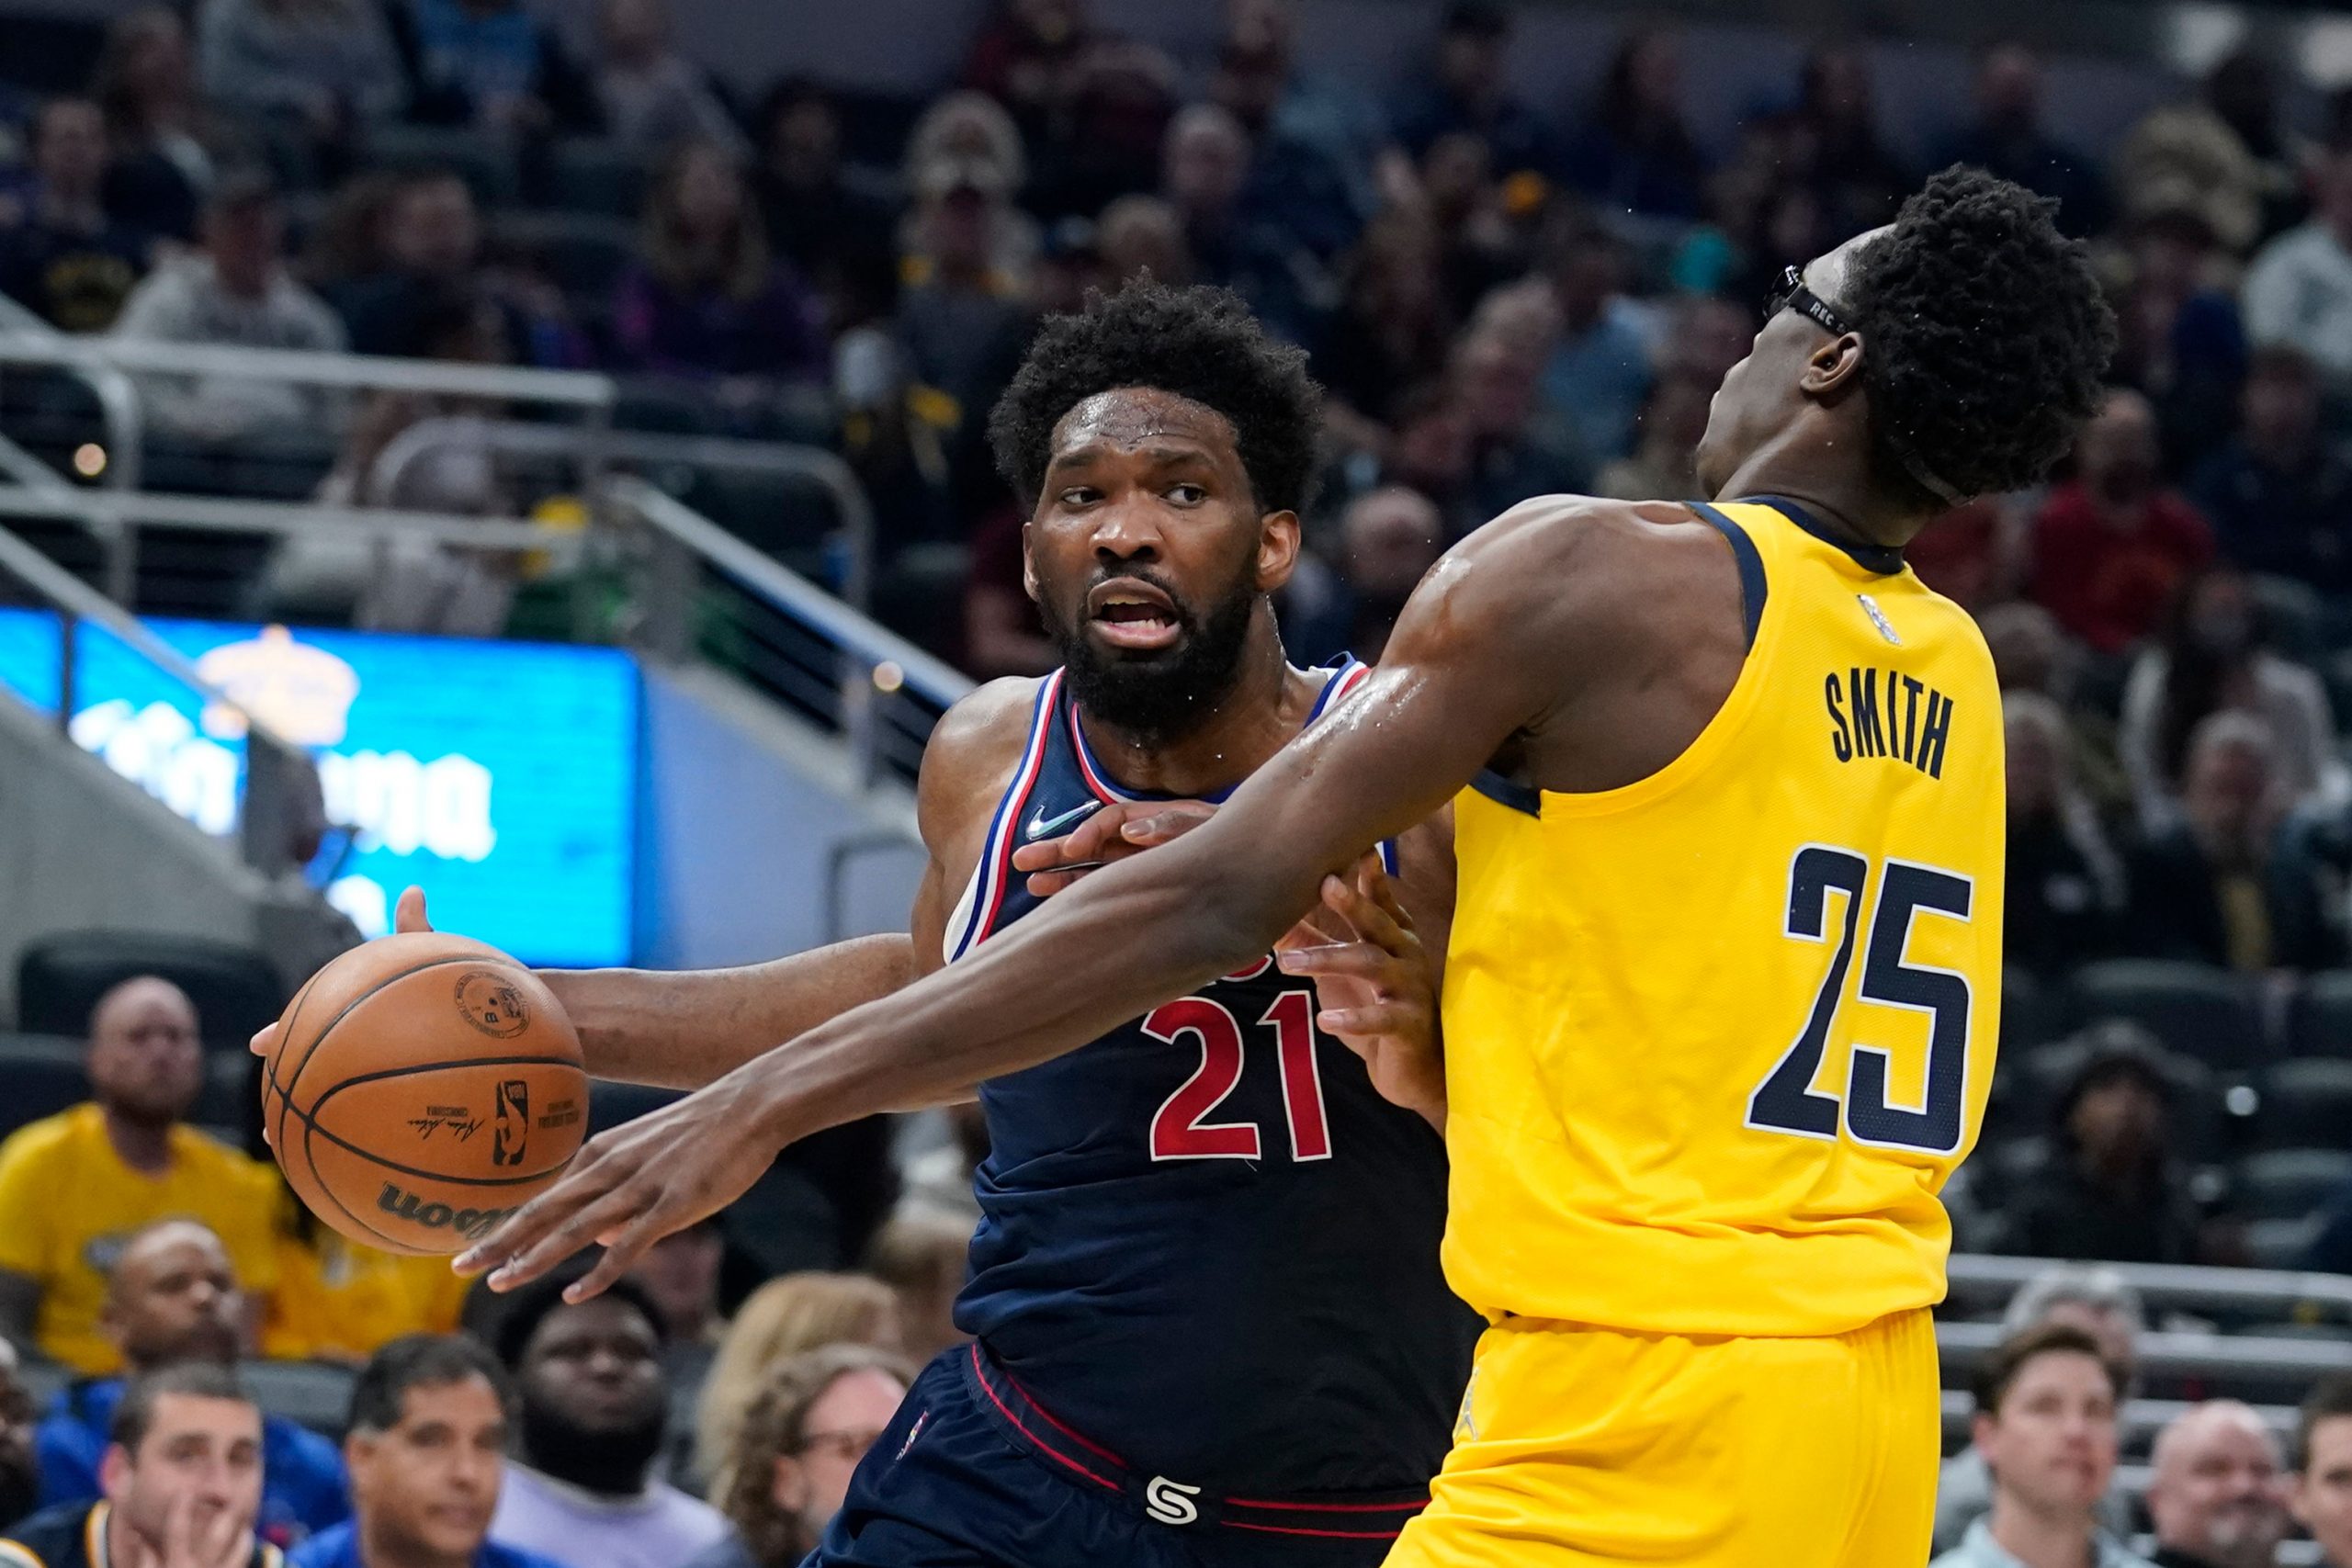 NBA: Joel Embiid scores 45, 76ers beat Pacers to pull even in Atlantic